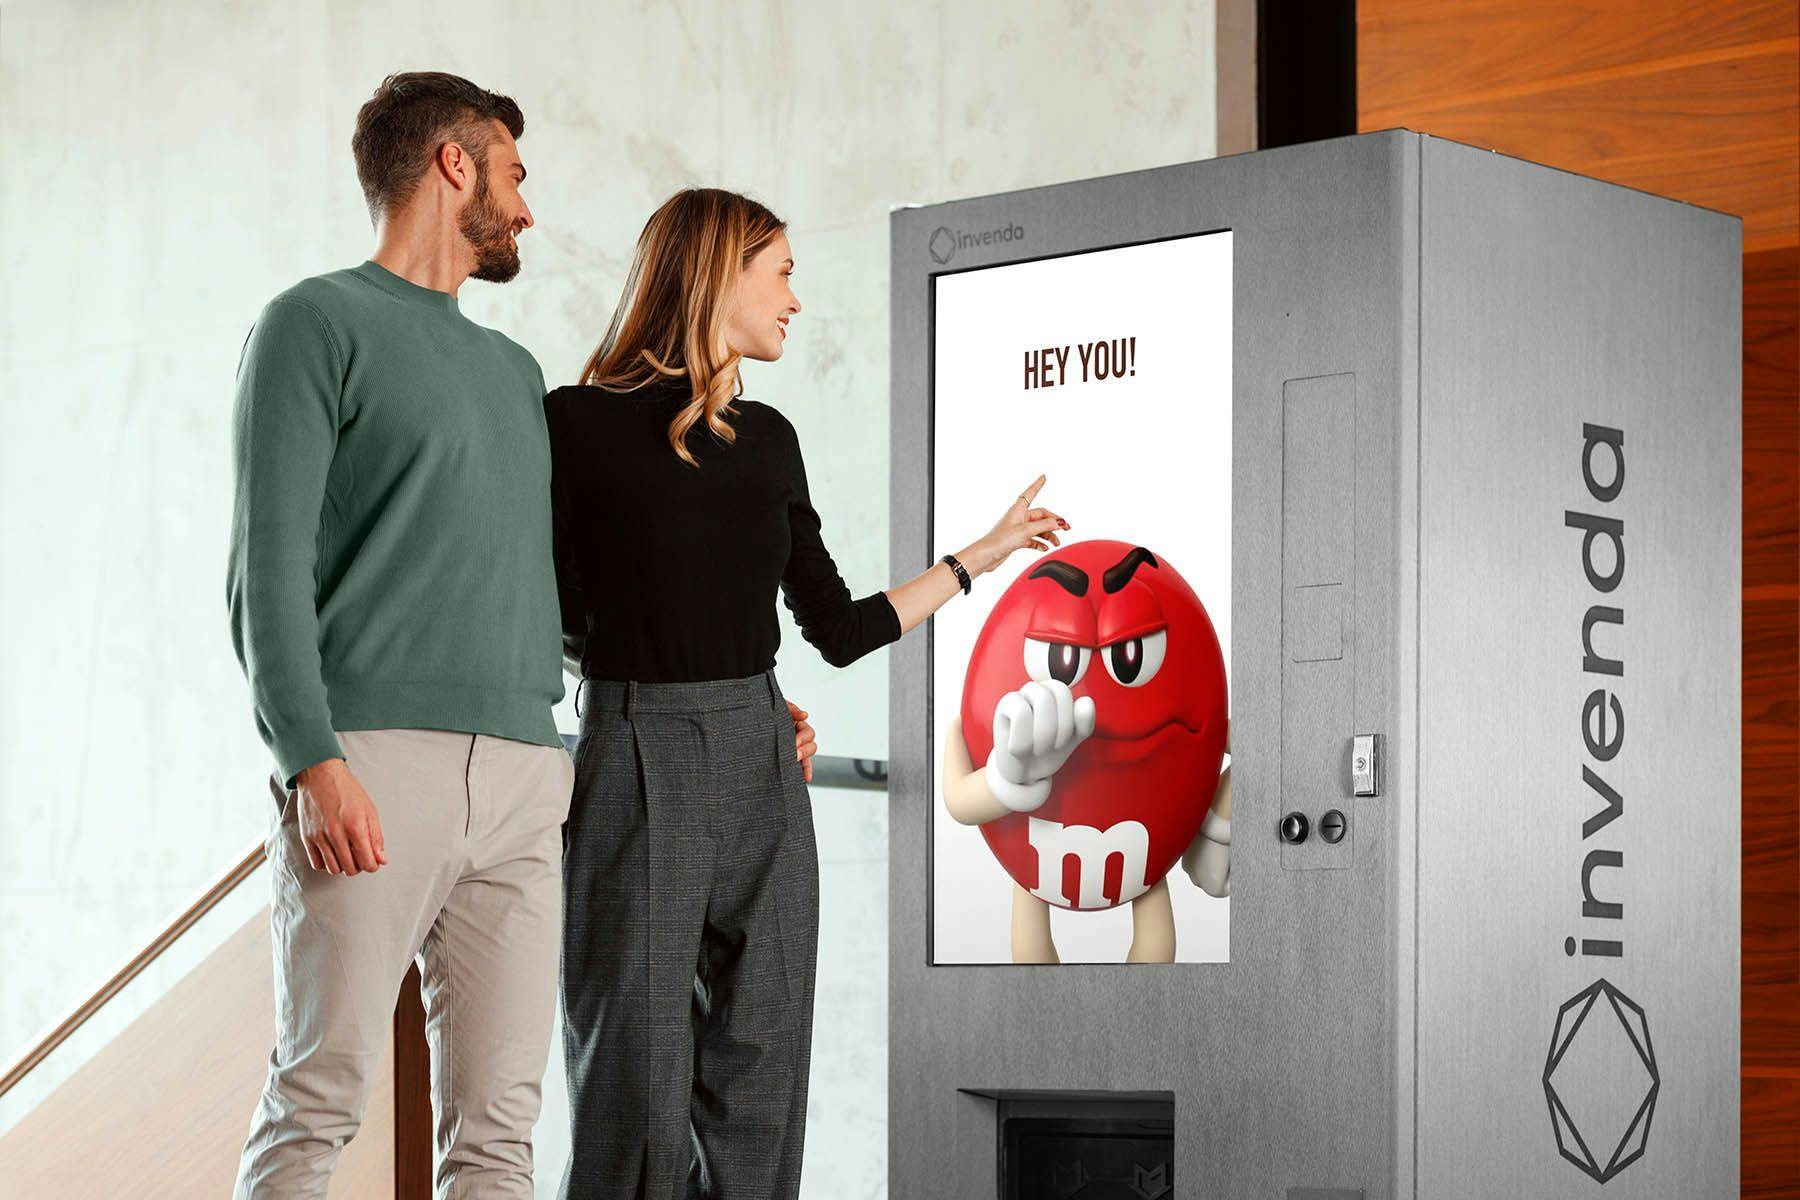 Man and woman looking at full screen ad on smart vending machine